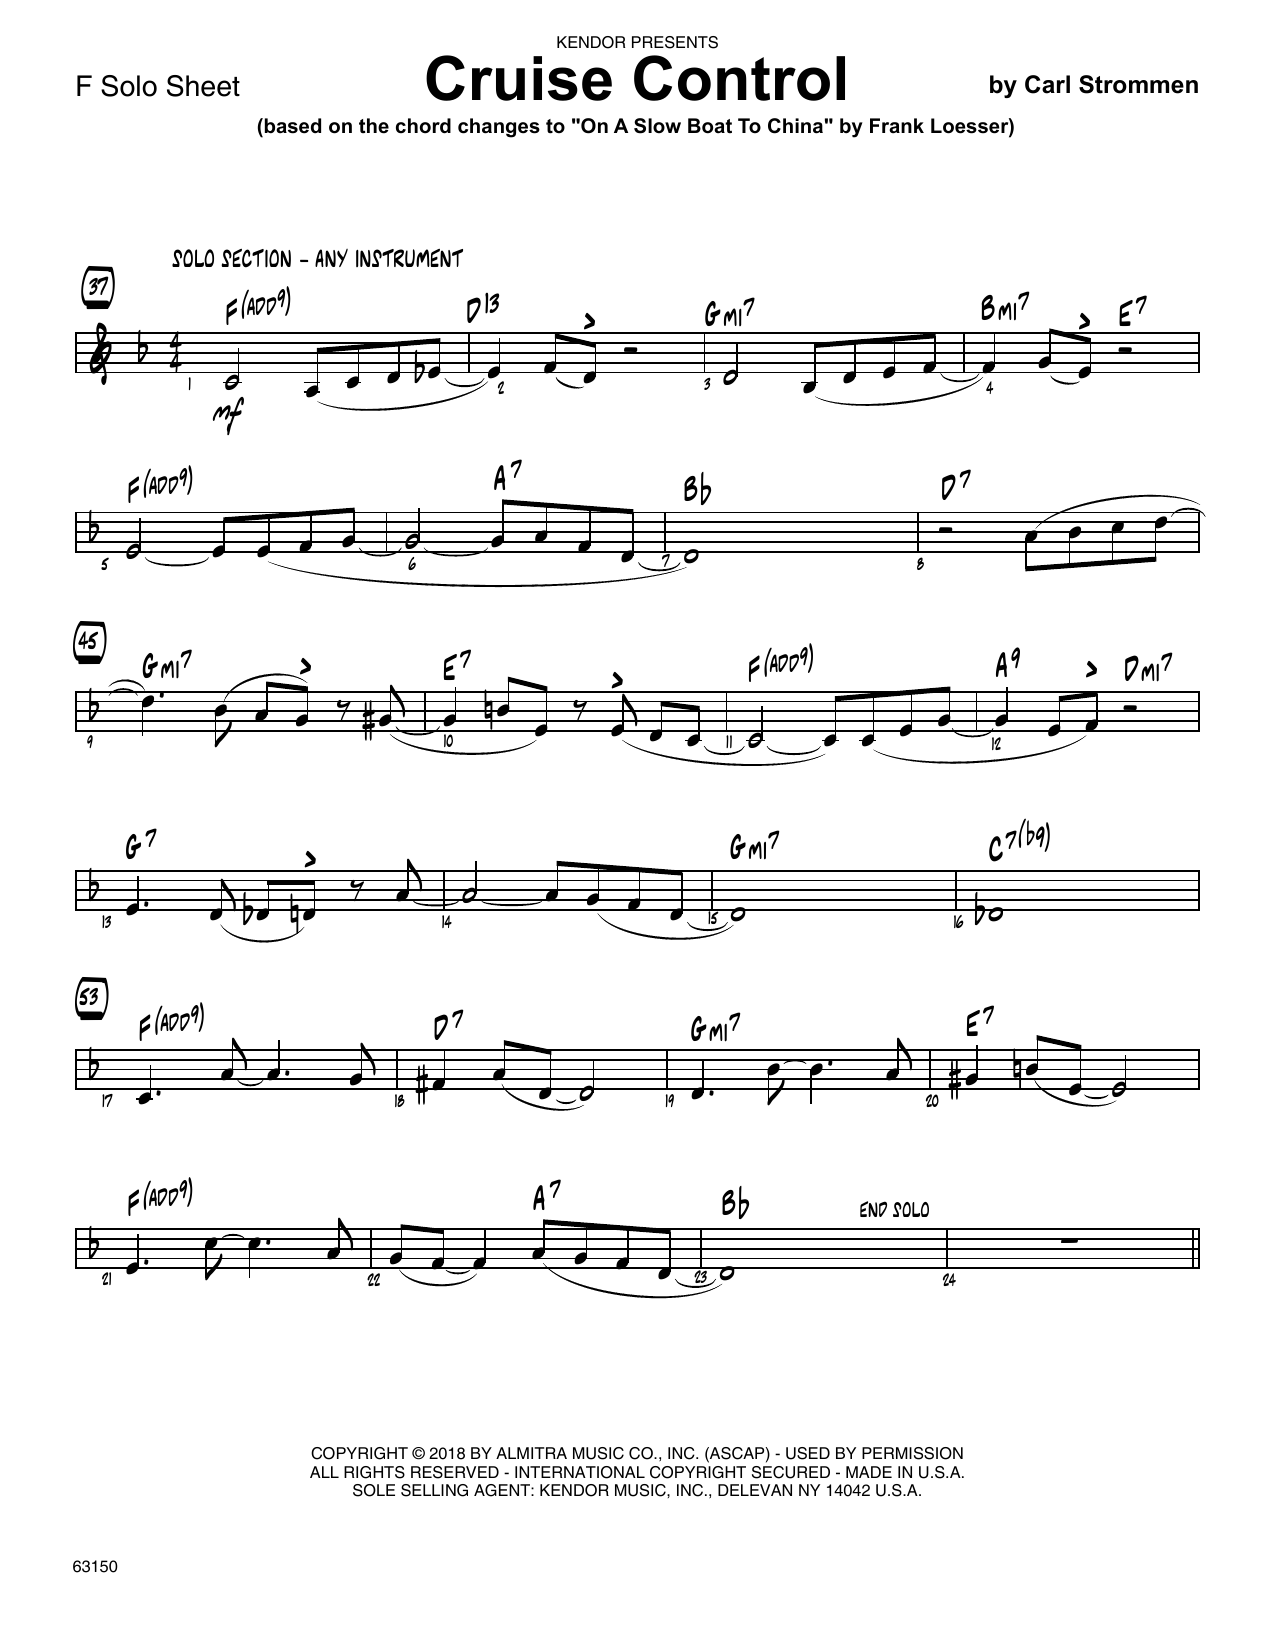 Download Carl Strommen Cruise Control - Solo Sheet for F Instr Sheet Music